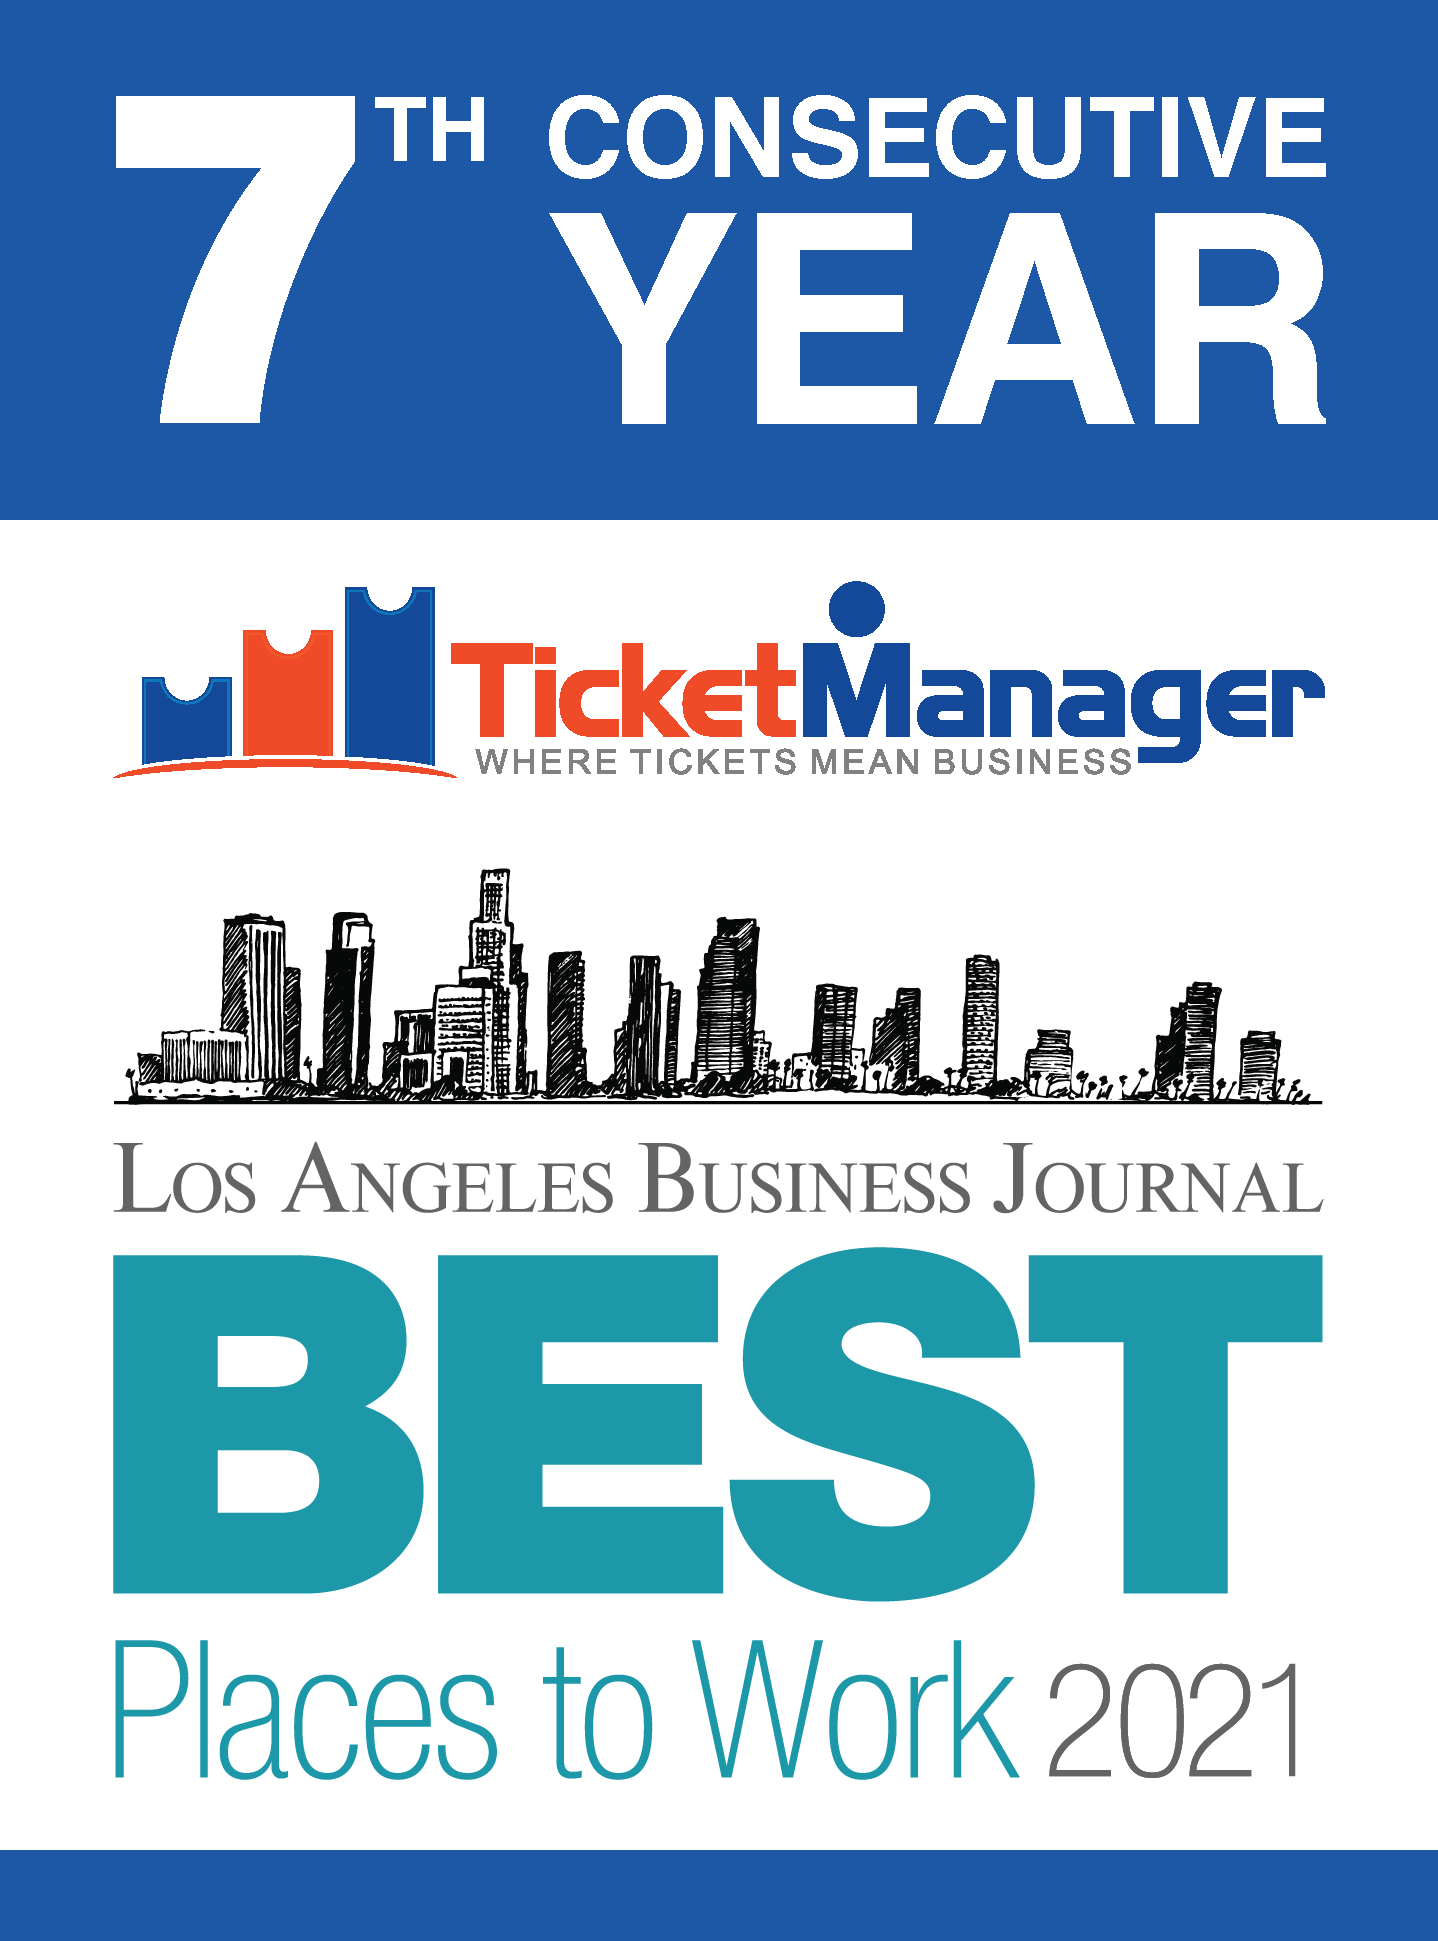 TicketManager Named One of the Best Places to Work in Los Angeles for 2021